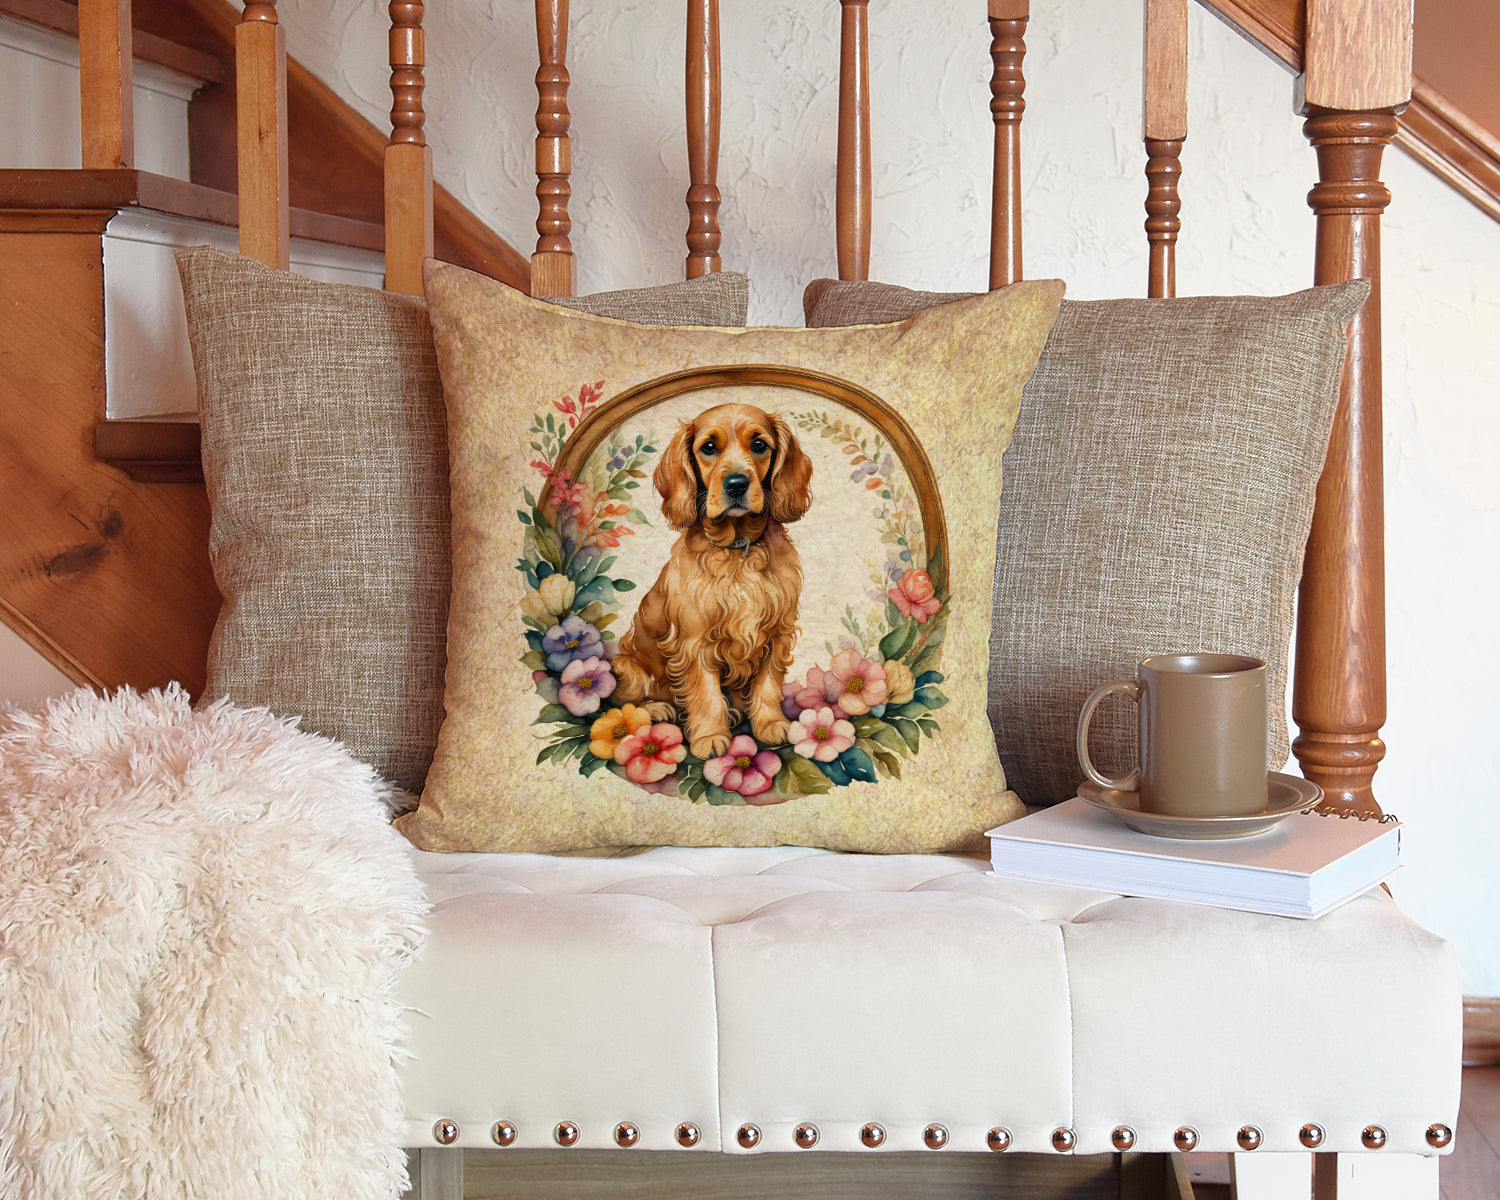 Cocker Spaniel and Flowers Fabric Decorative Pillow